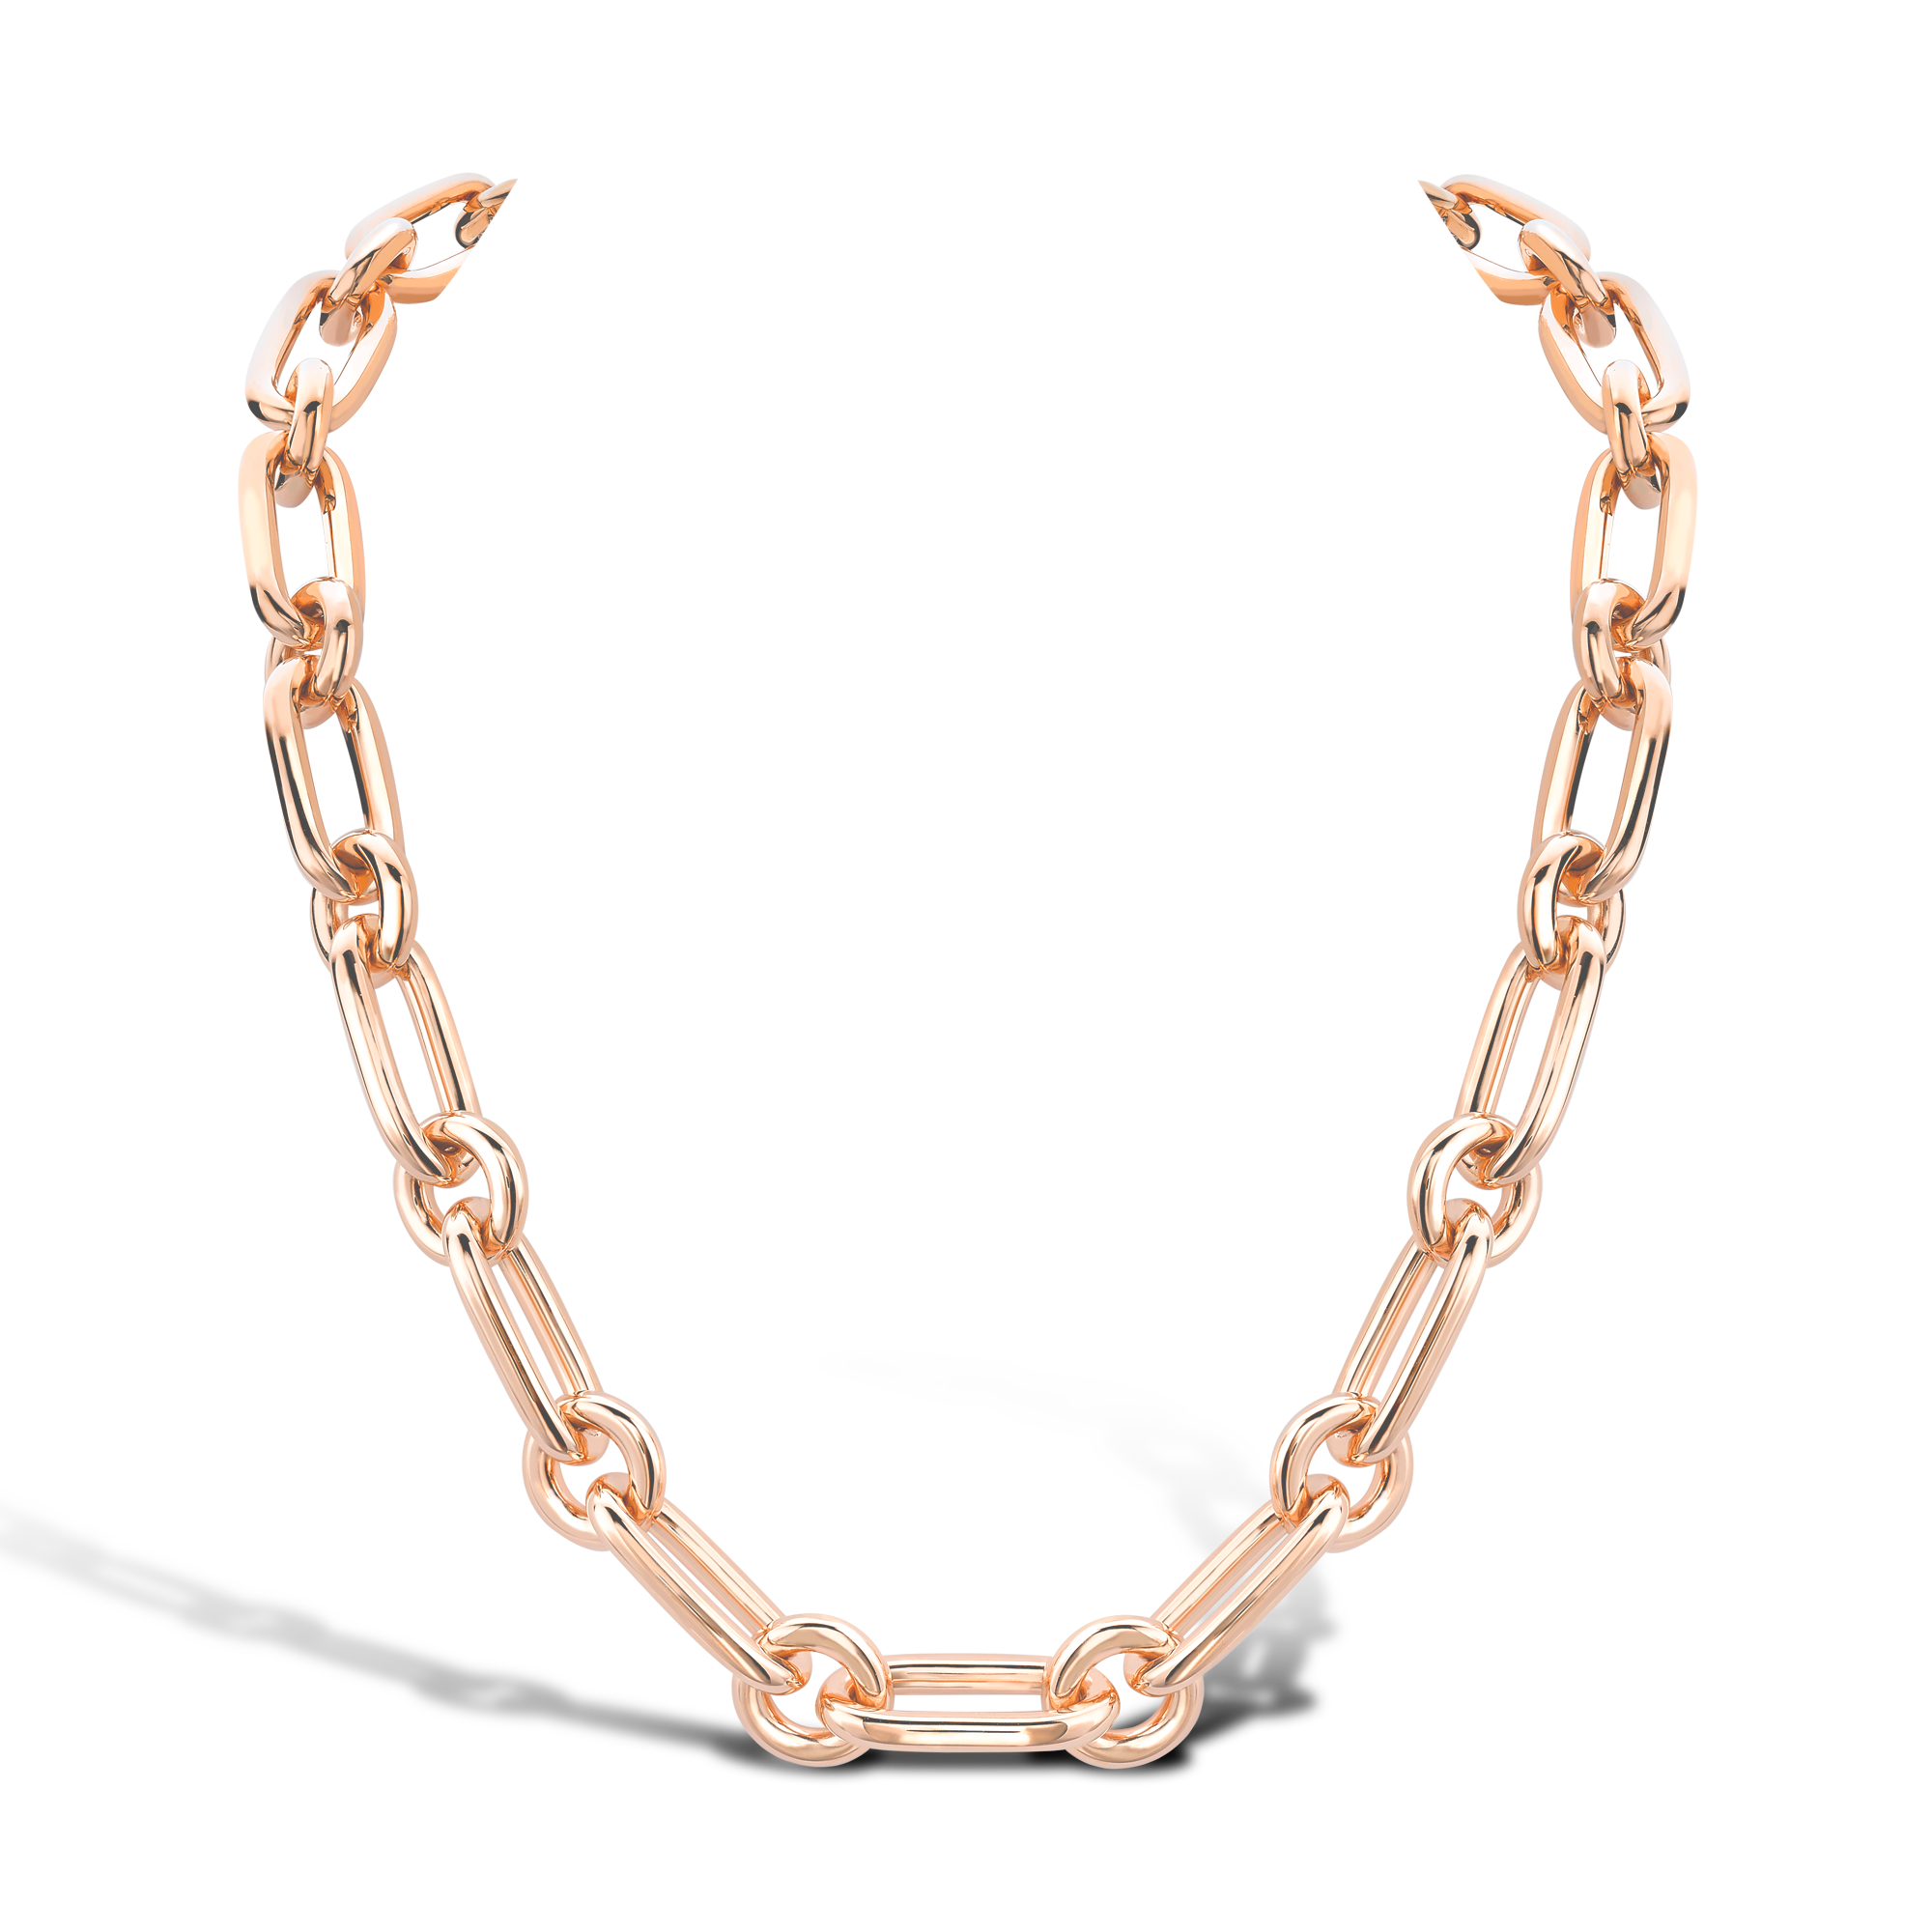 Havana Chain Necklace in 18ct Rose Gold